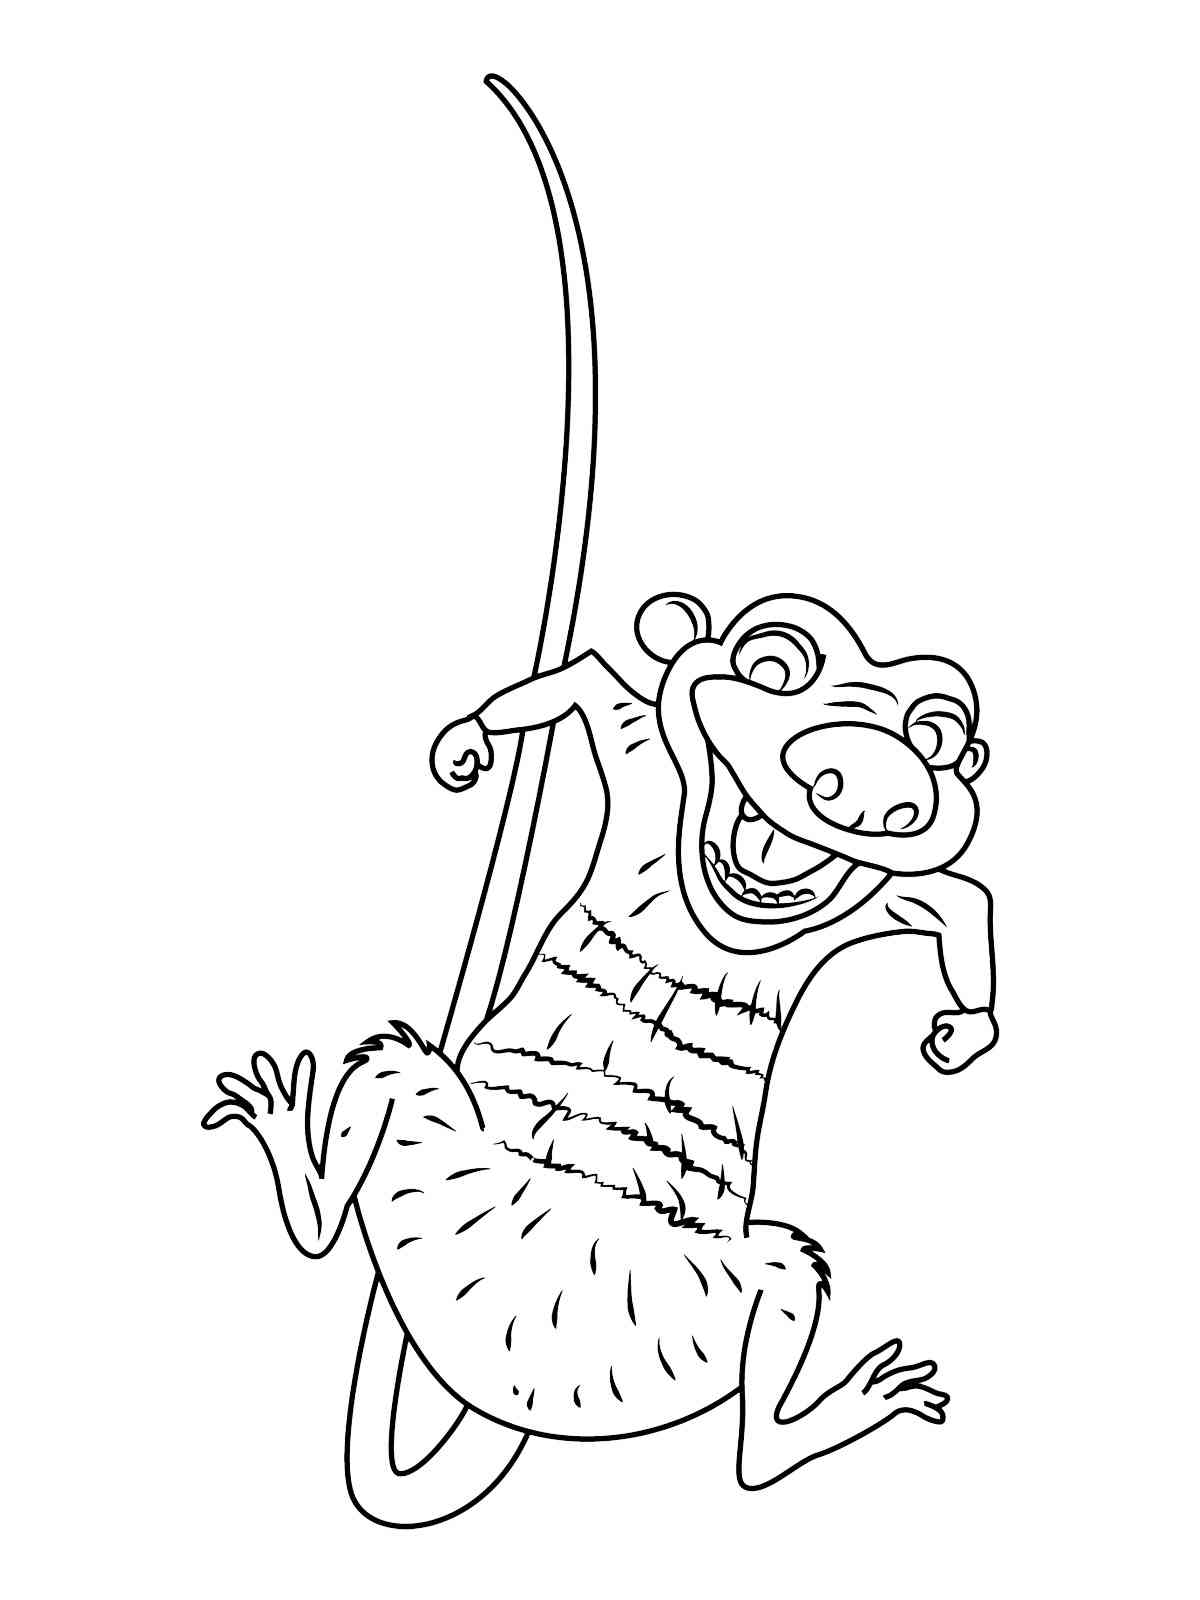 Ice Age 2 coloring page